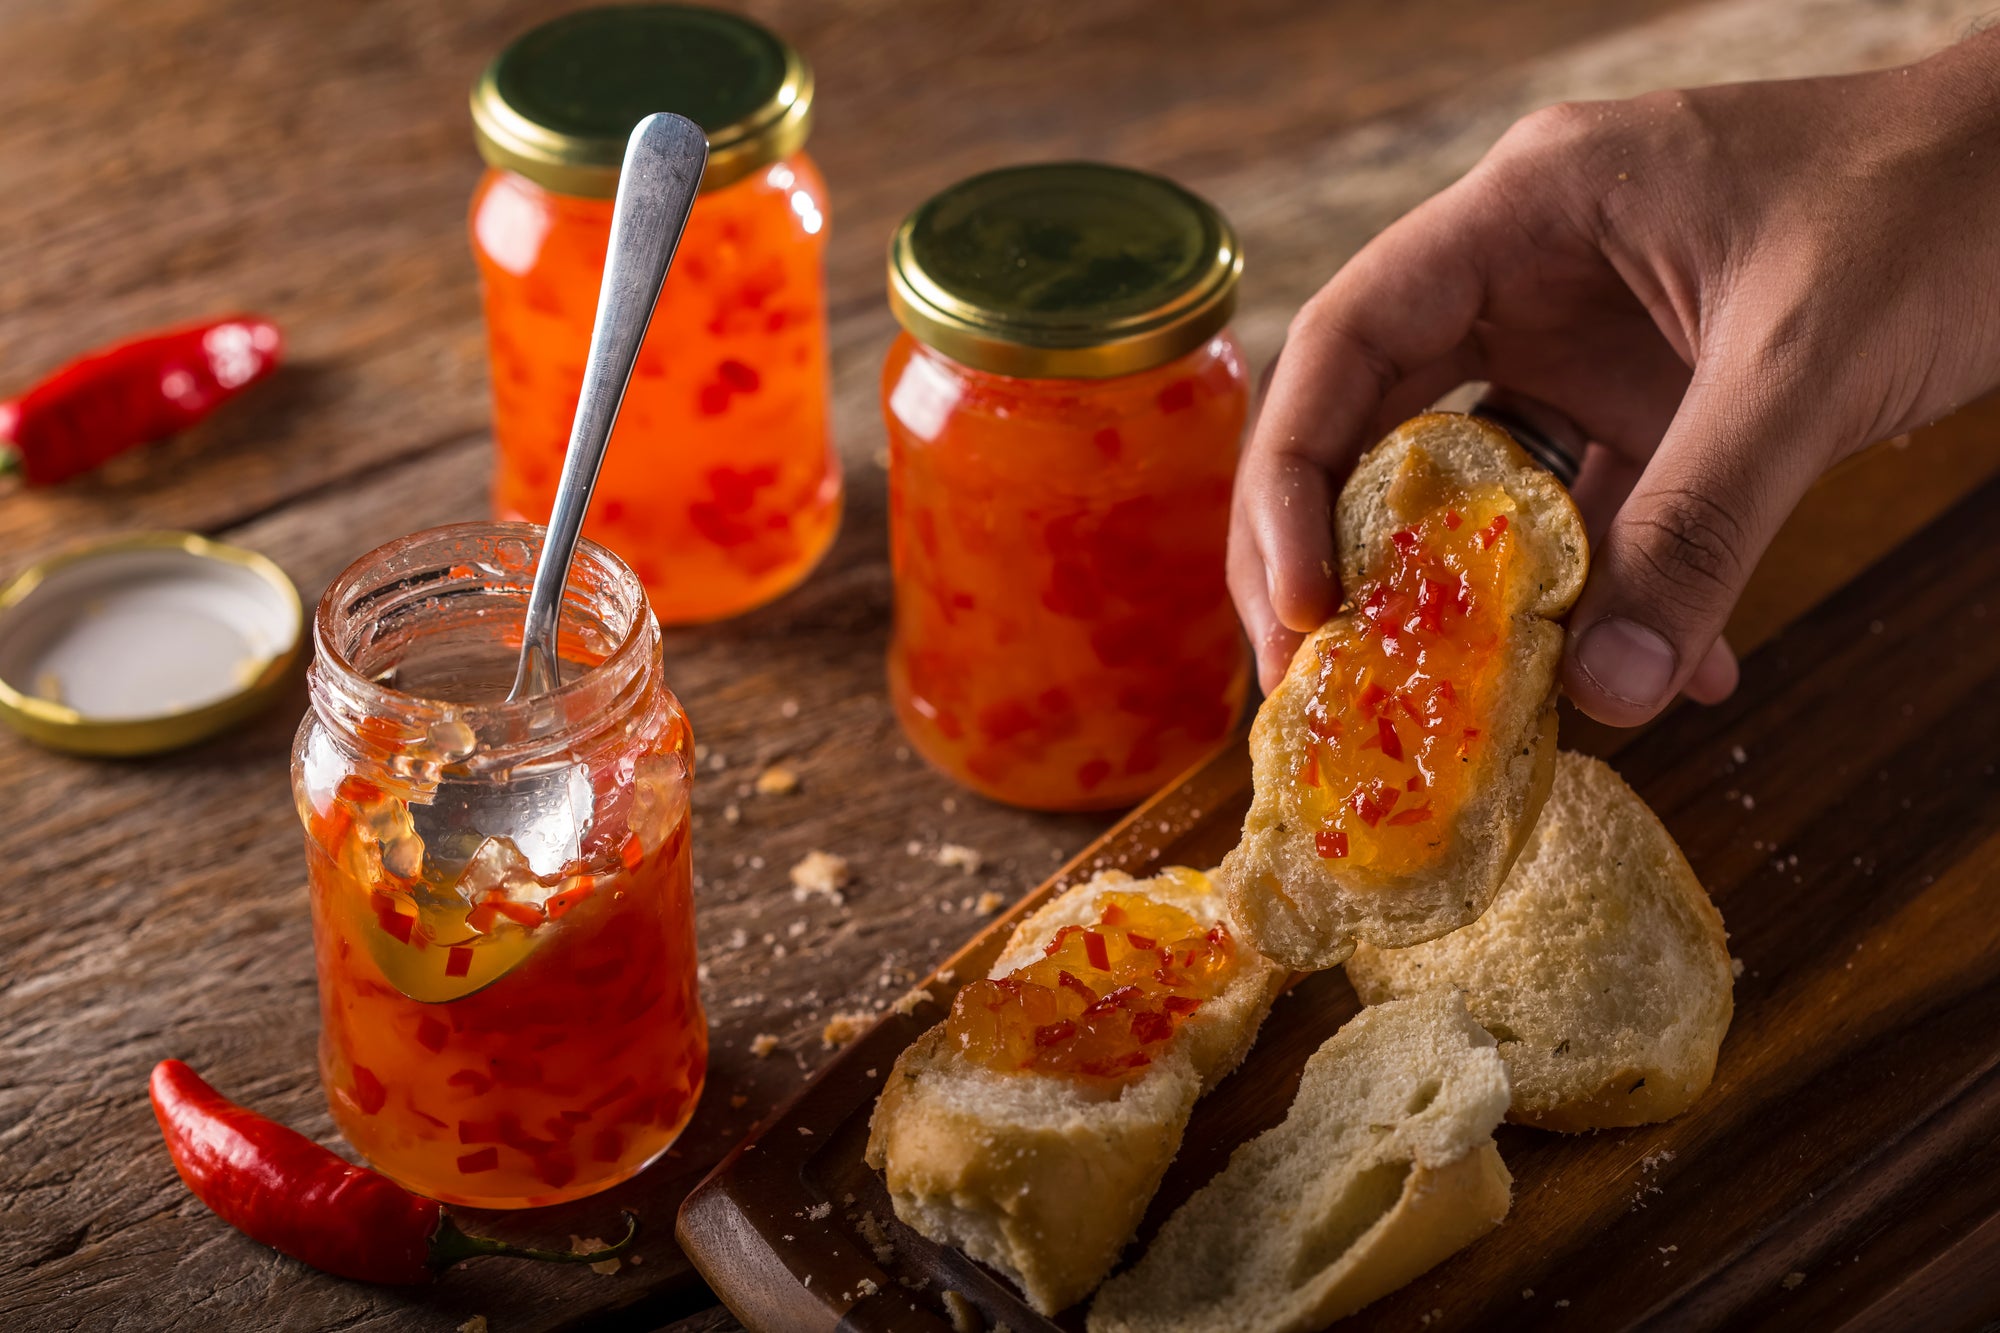 Savory and Sweet: The Best Bread and Cracker Options for Enjoying Your Pepper Jelly